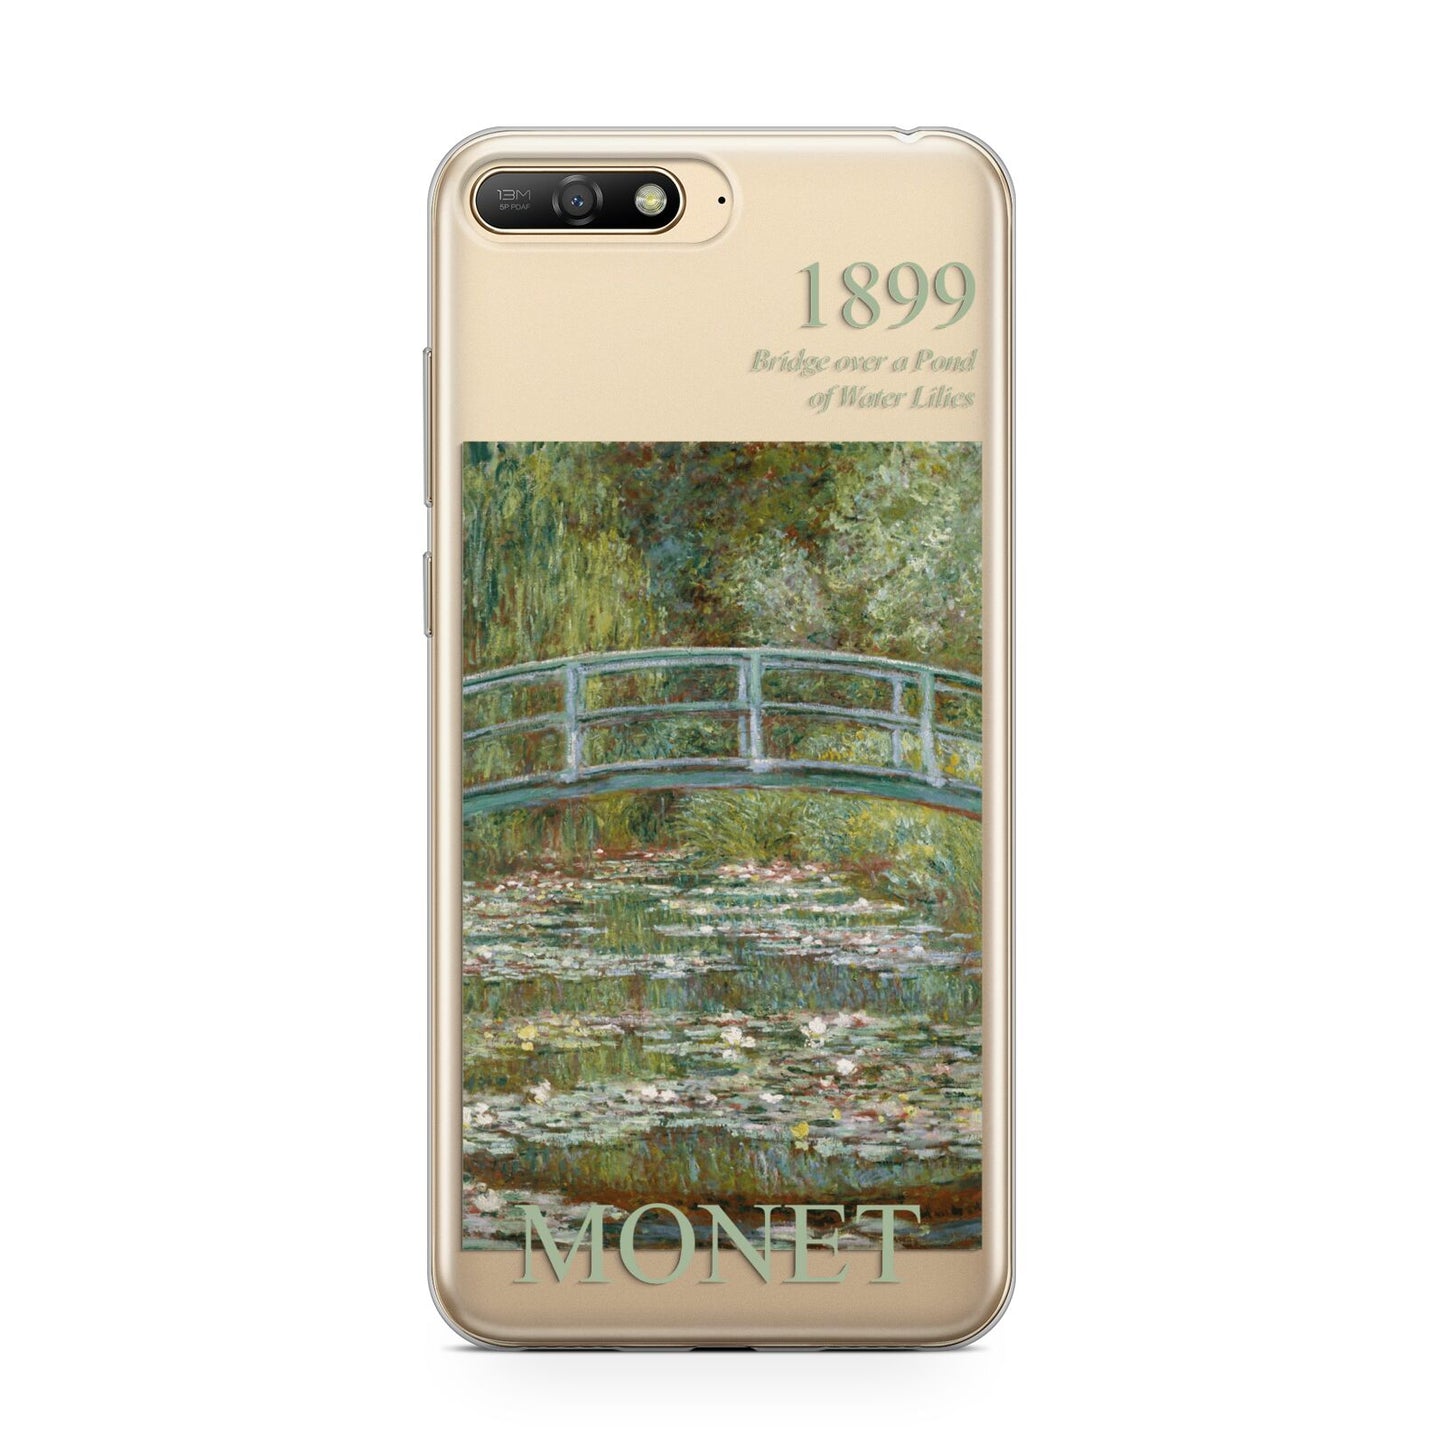 Bridge Over A Pond Of Water Lilies By Monet Huawei Y6 2018